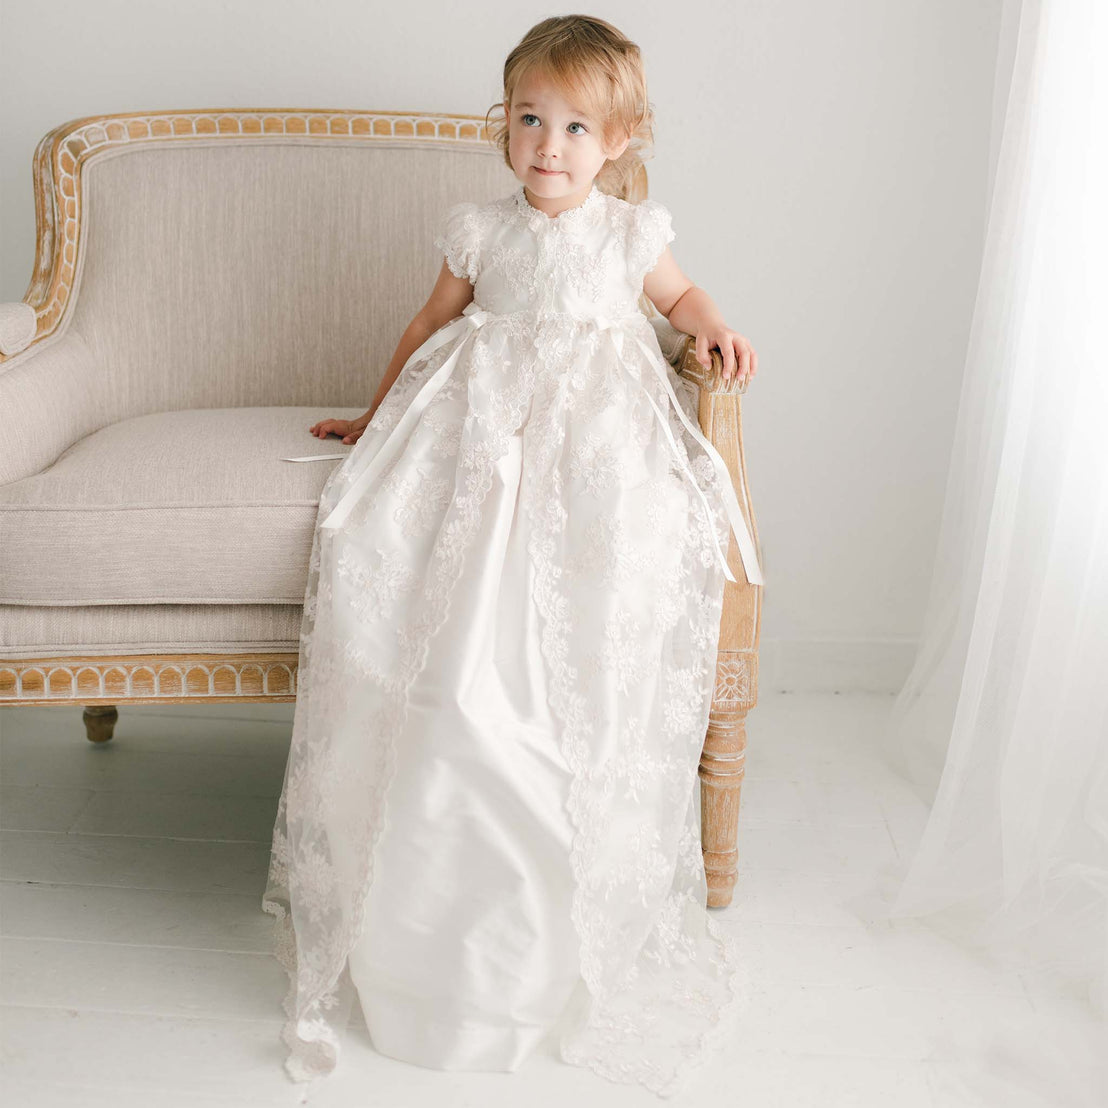 Baby girl without bonnet sitting in chair wearing the full length Christening Gown, the Penelope made of silk and luxurious floral lace.